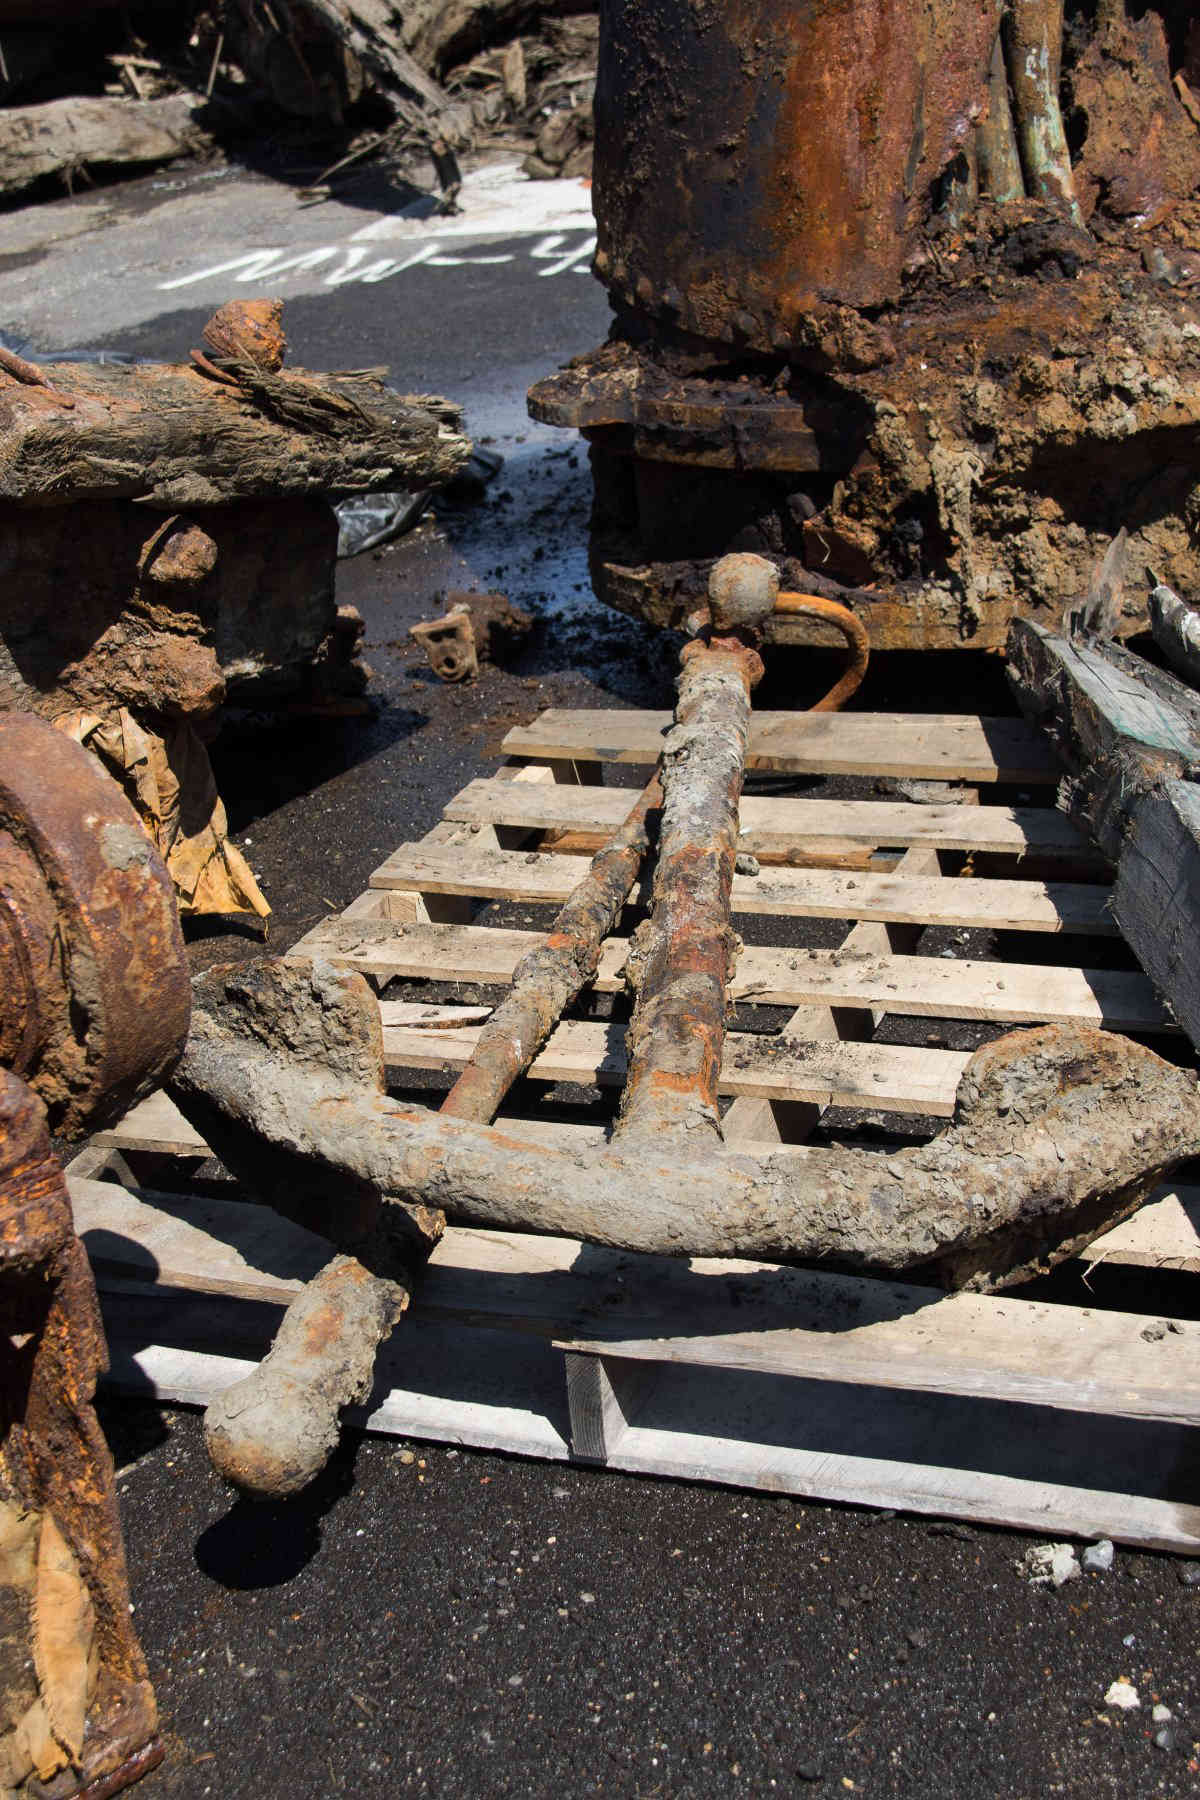 On BPR: There’s life — and artifacts — in the Gowanus Canal!